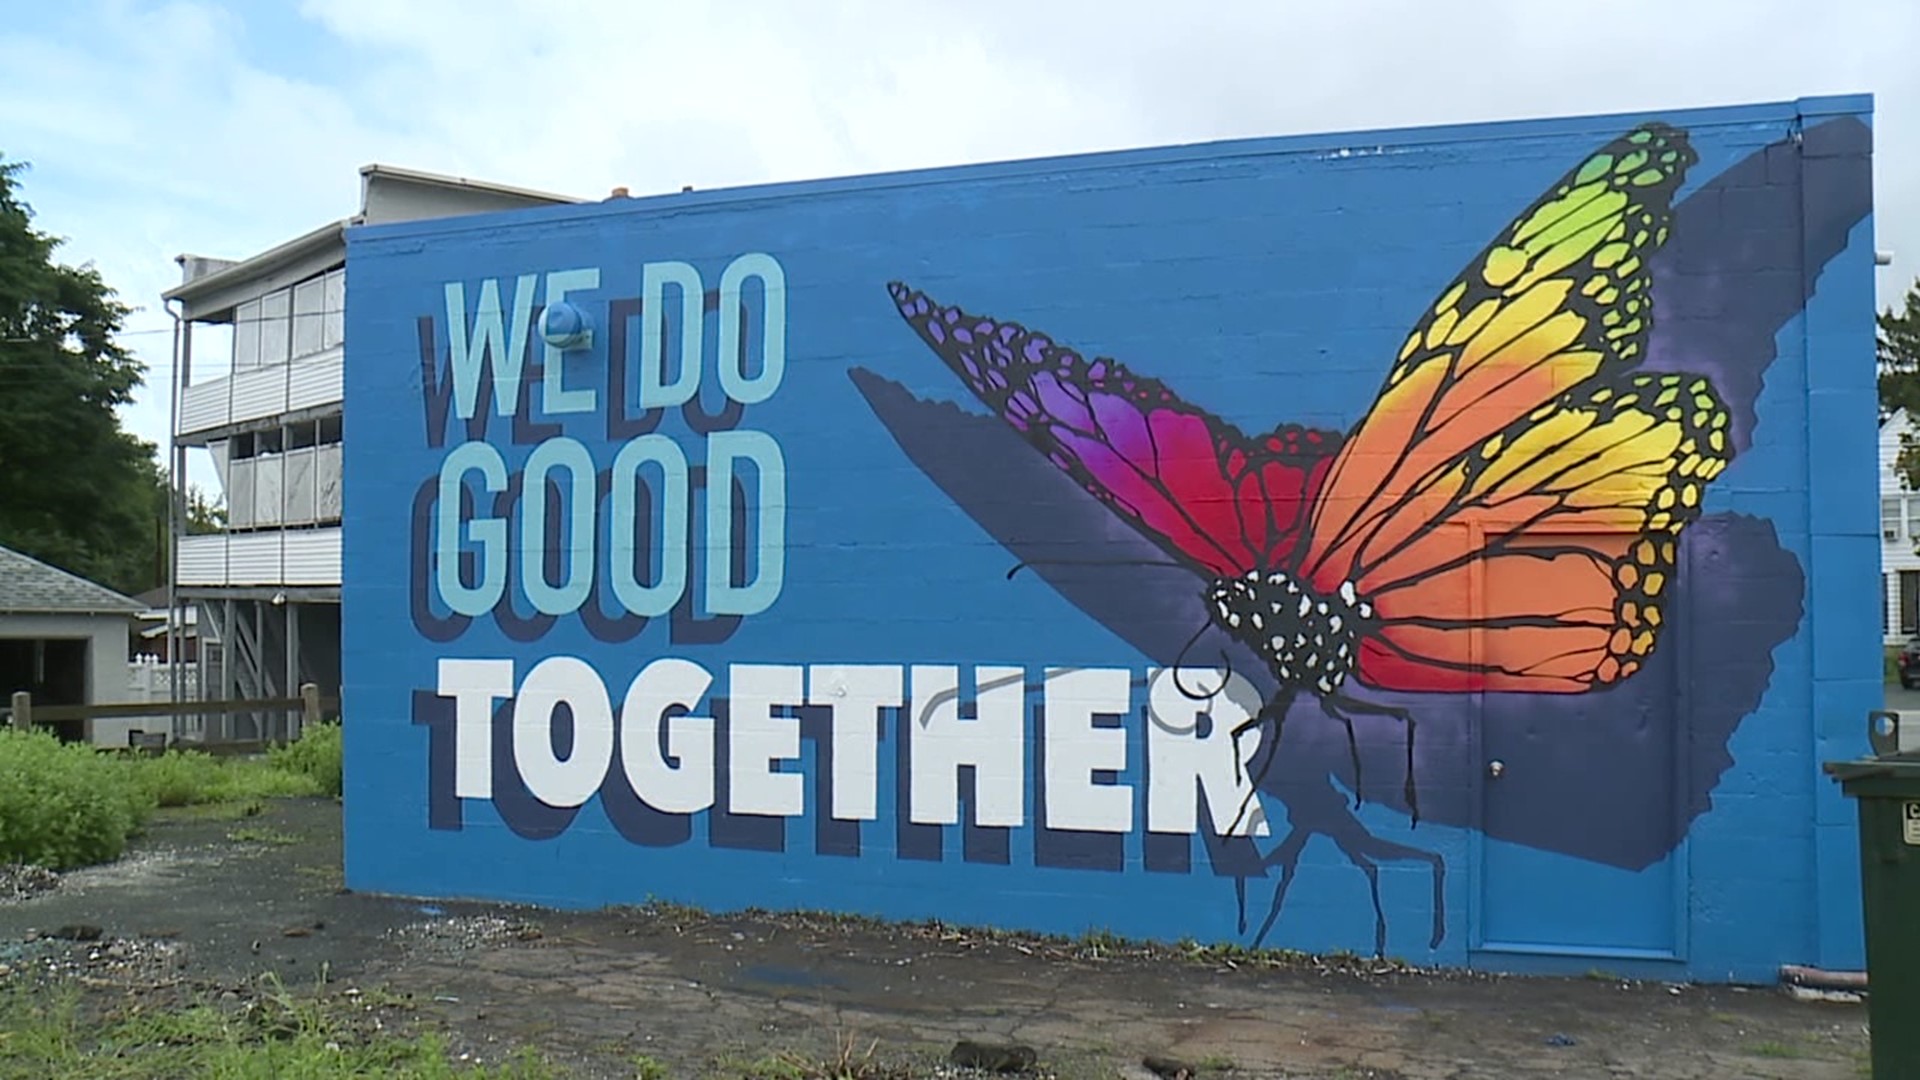 A group in Dunmore has one goal: To make their neighborhood a more beautiful place to live.